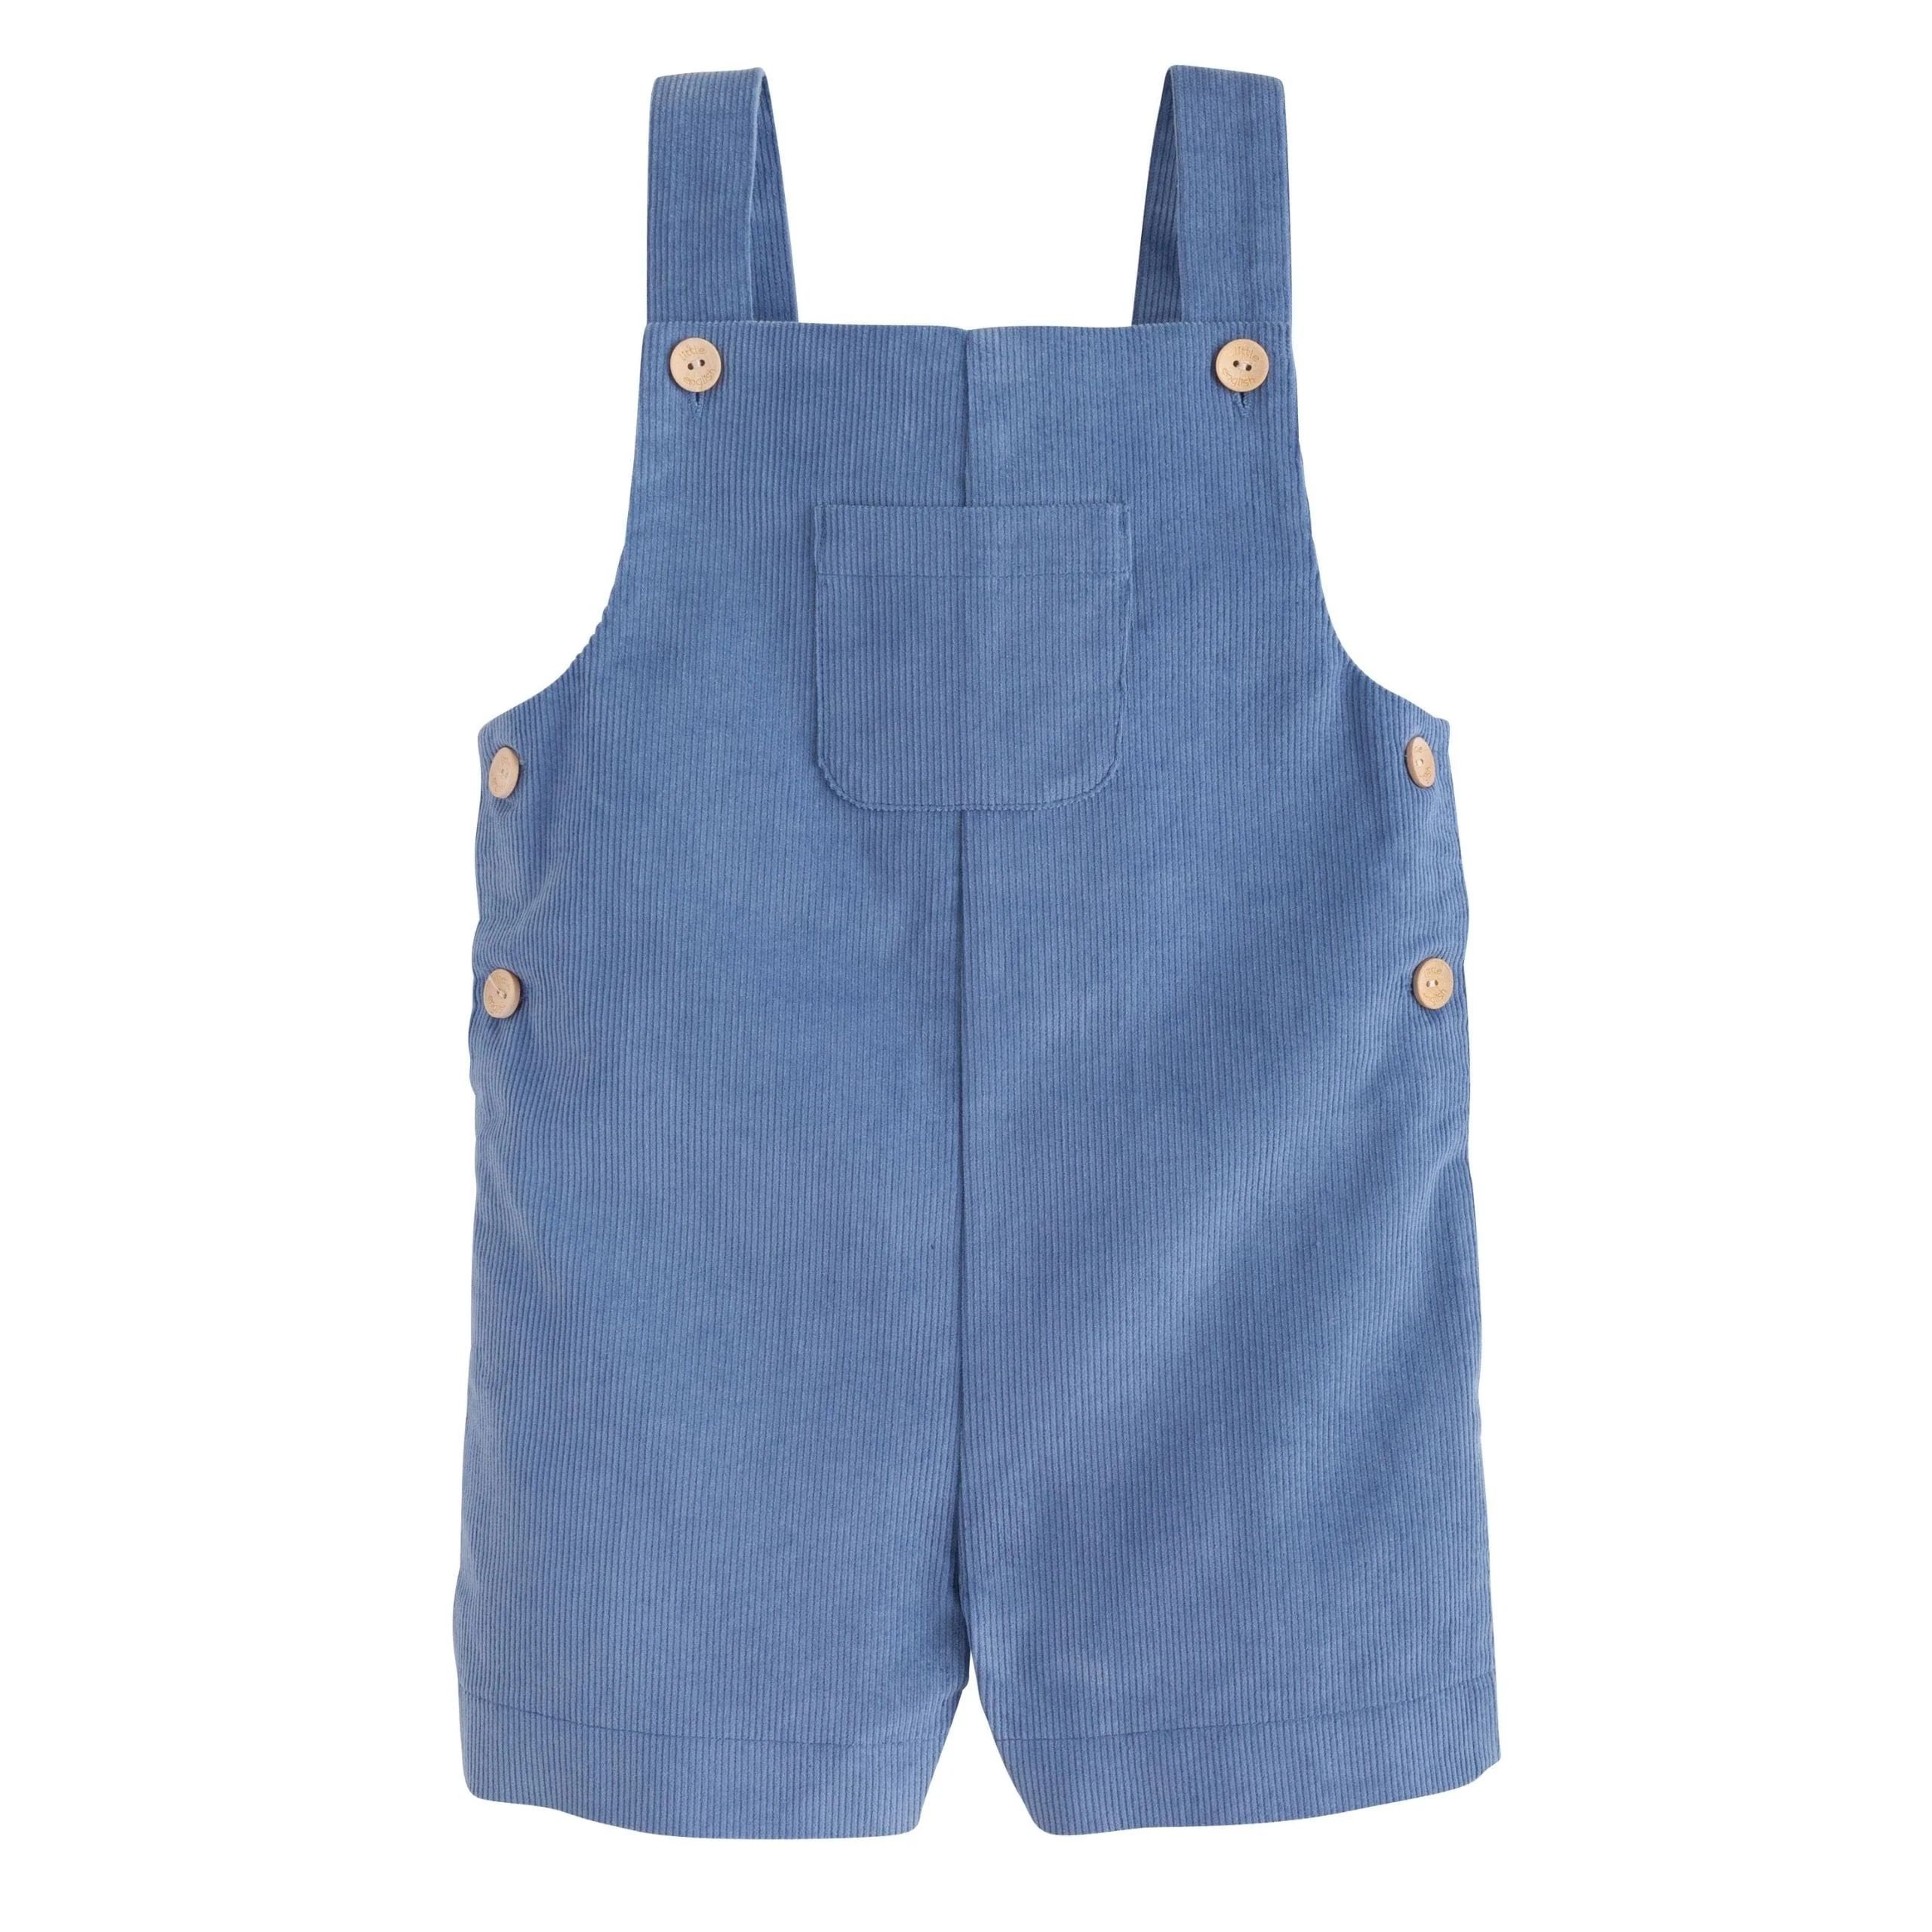 Kids Overall Short - Childrens Boutique Clothing | Little English